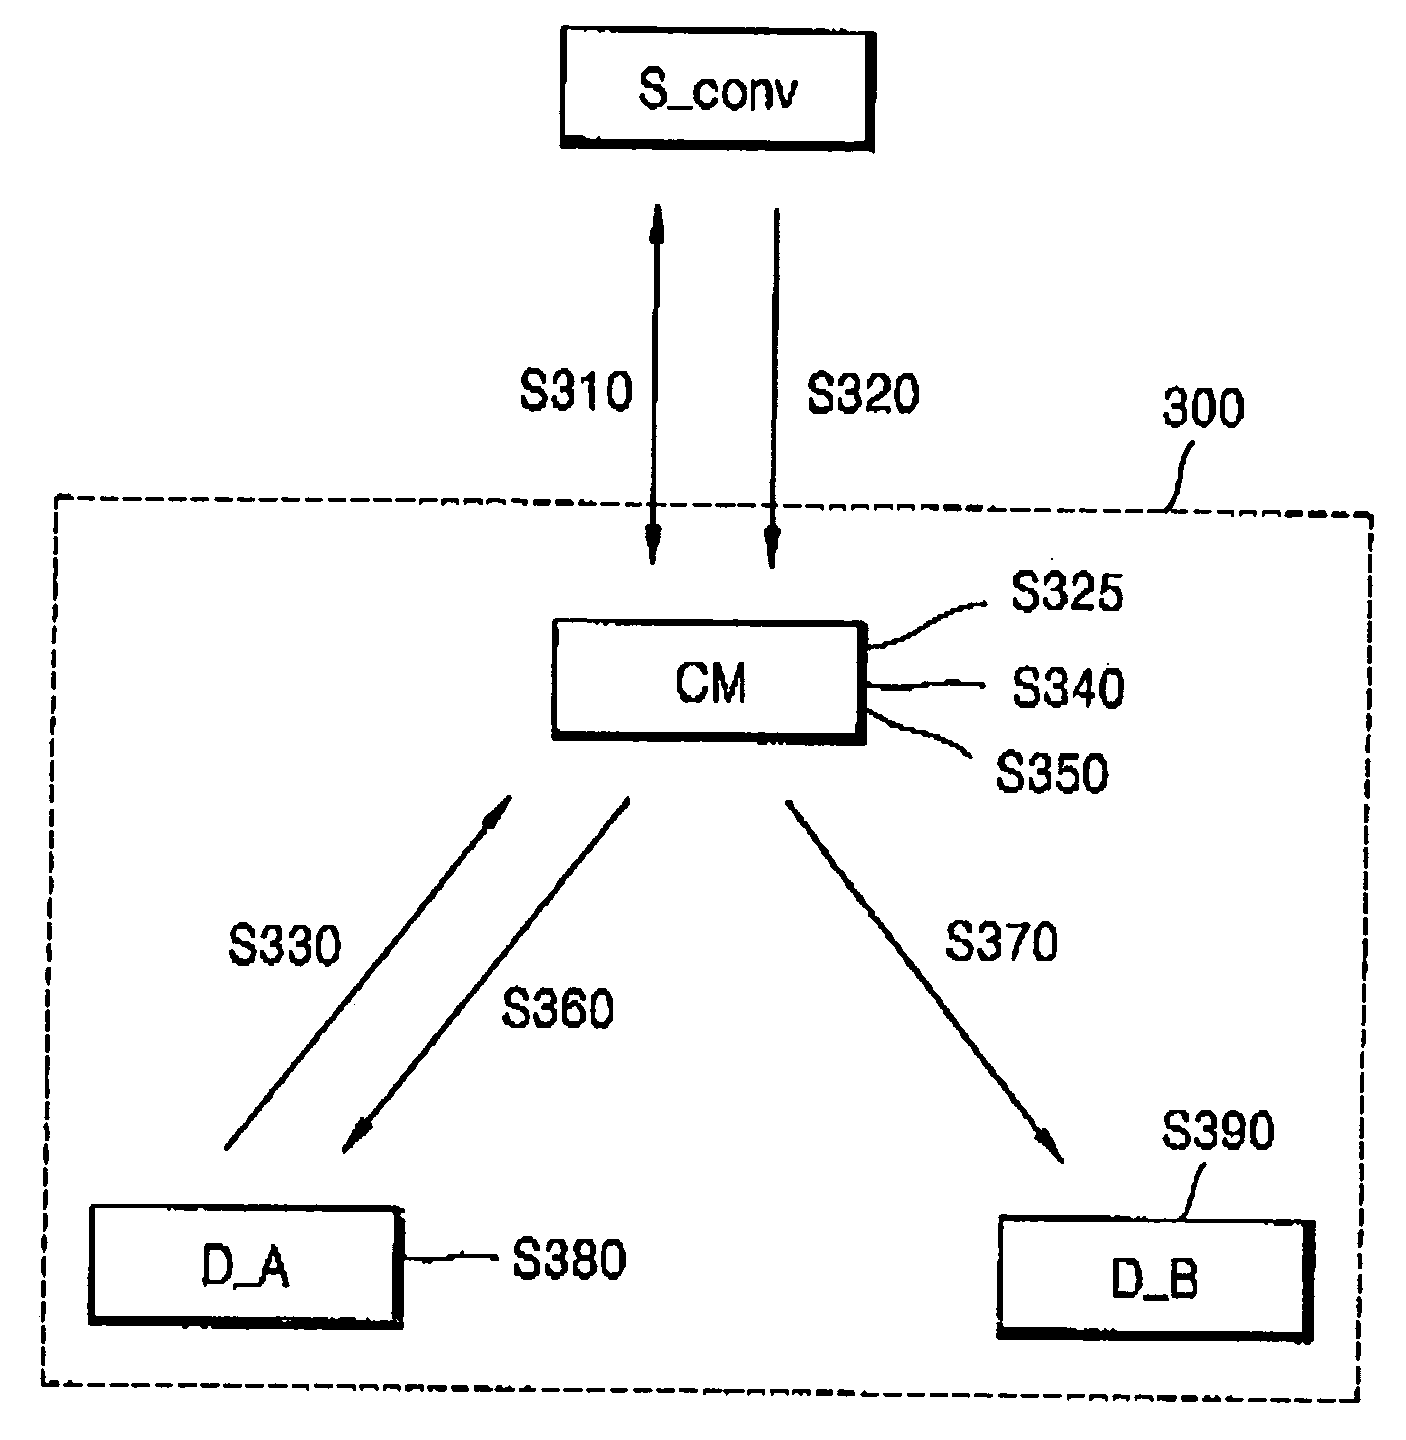 Digital rights management conversion method and apparatus